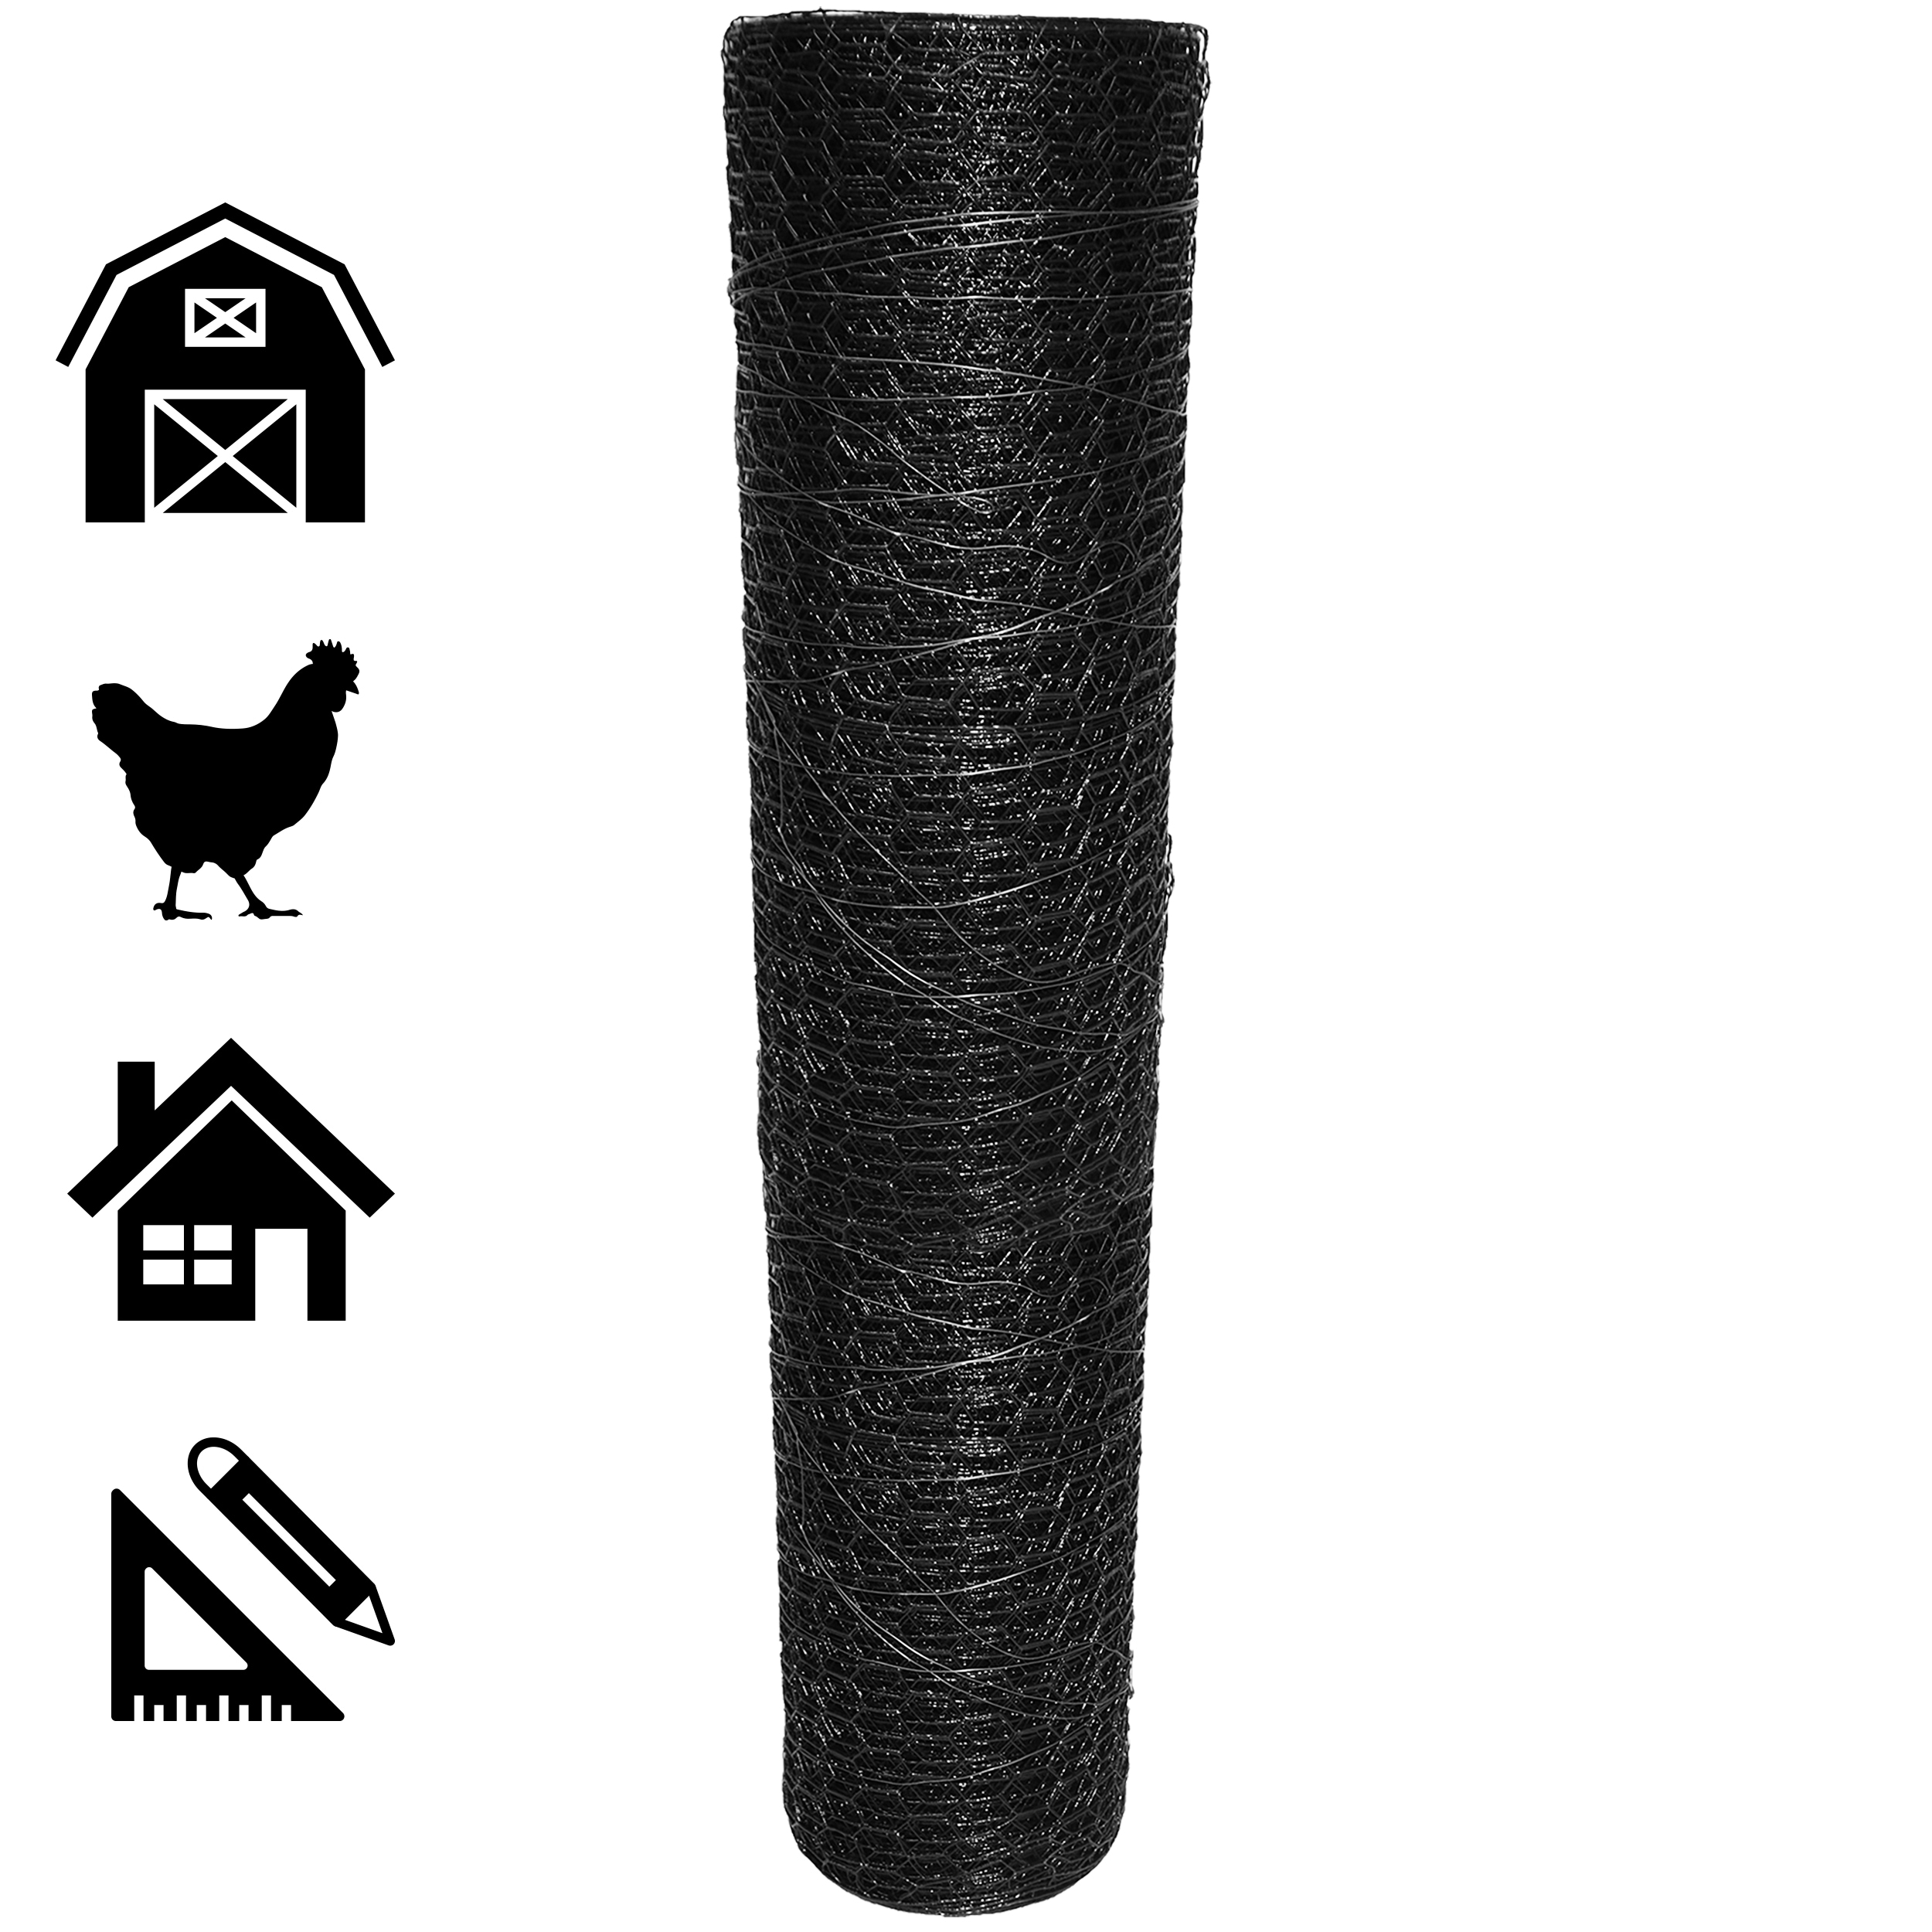 Fencer Wire NV19-B3X150MF34 150 ft. x 12 x 36 in. Vinyl Coated Hex Netting, Black